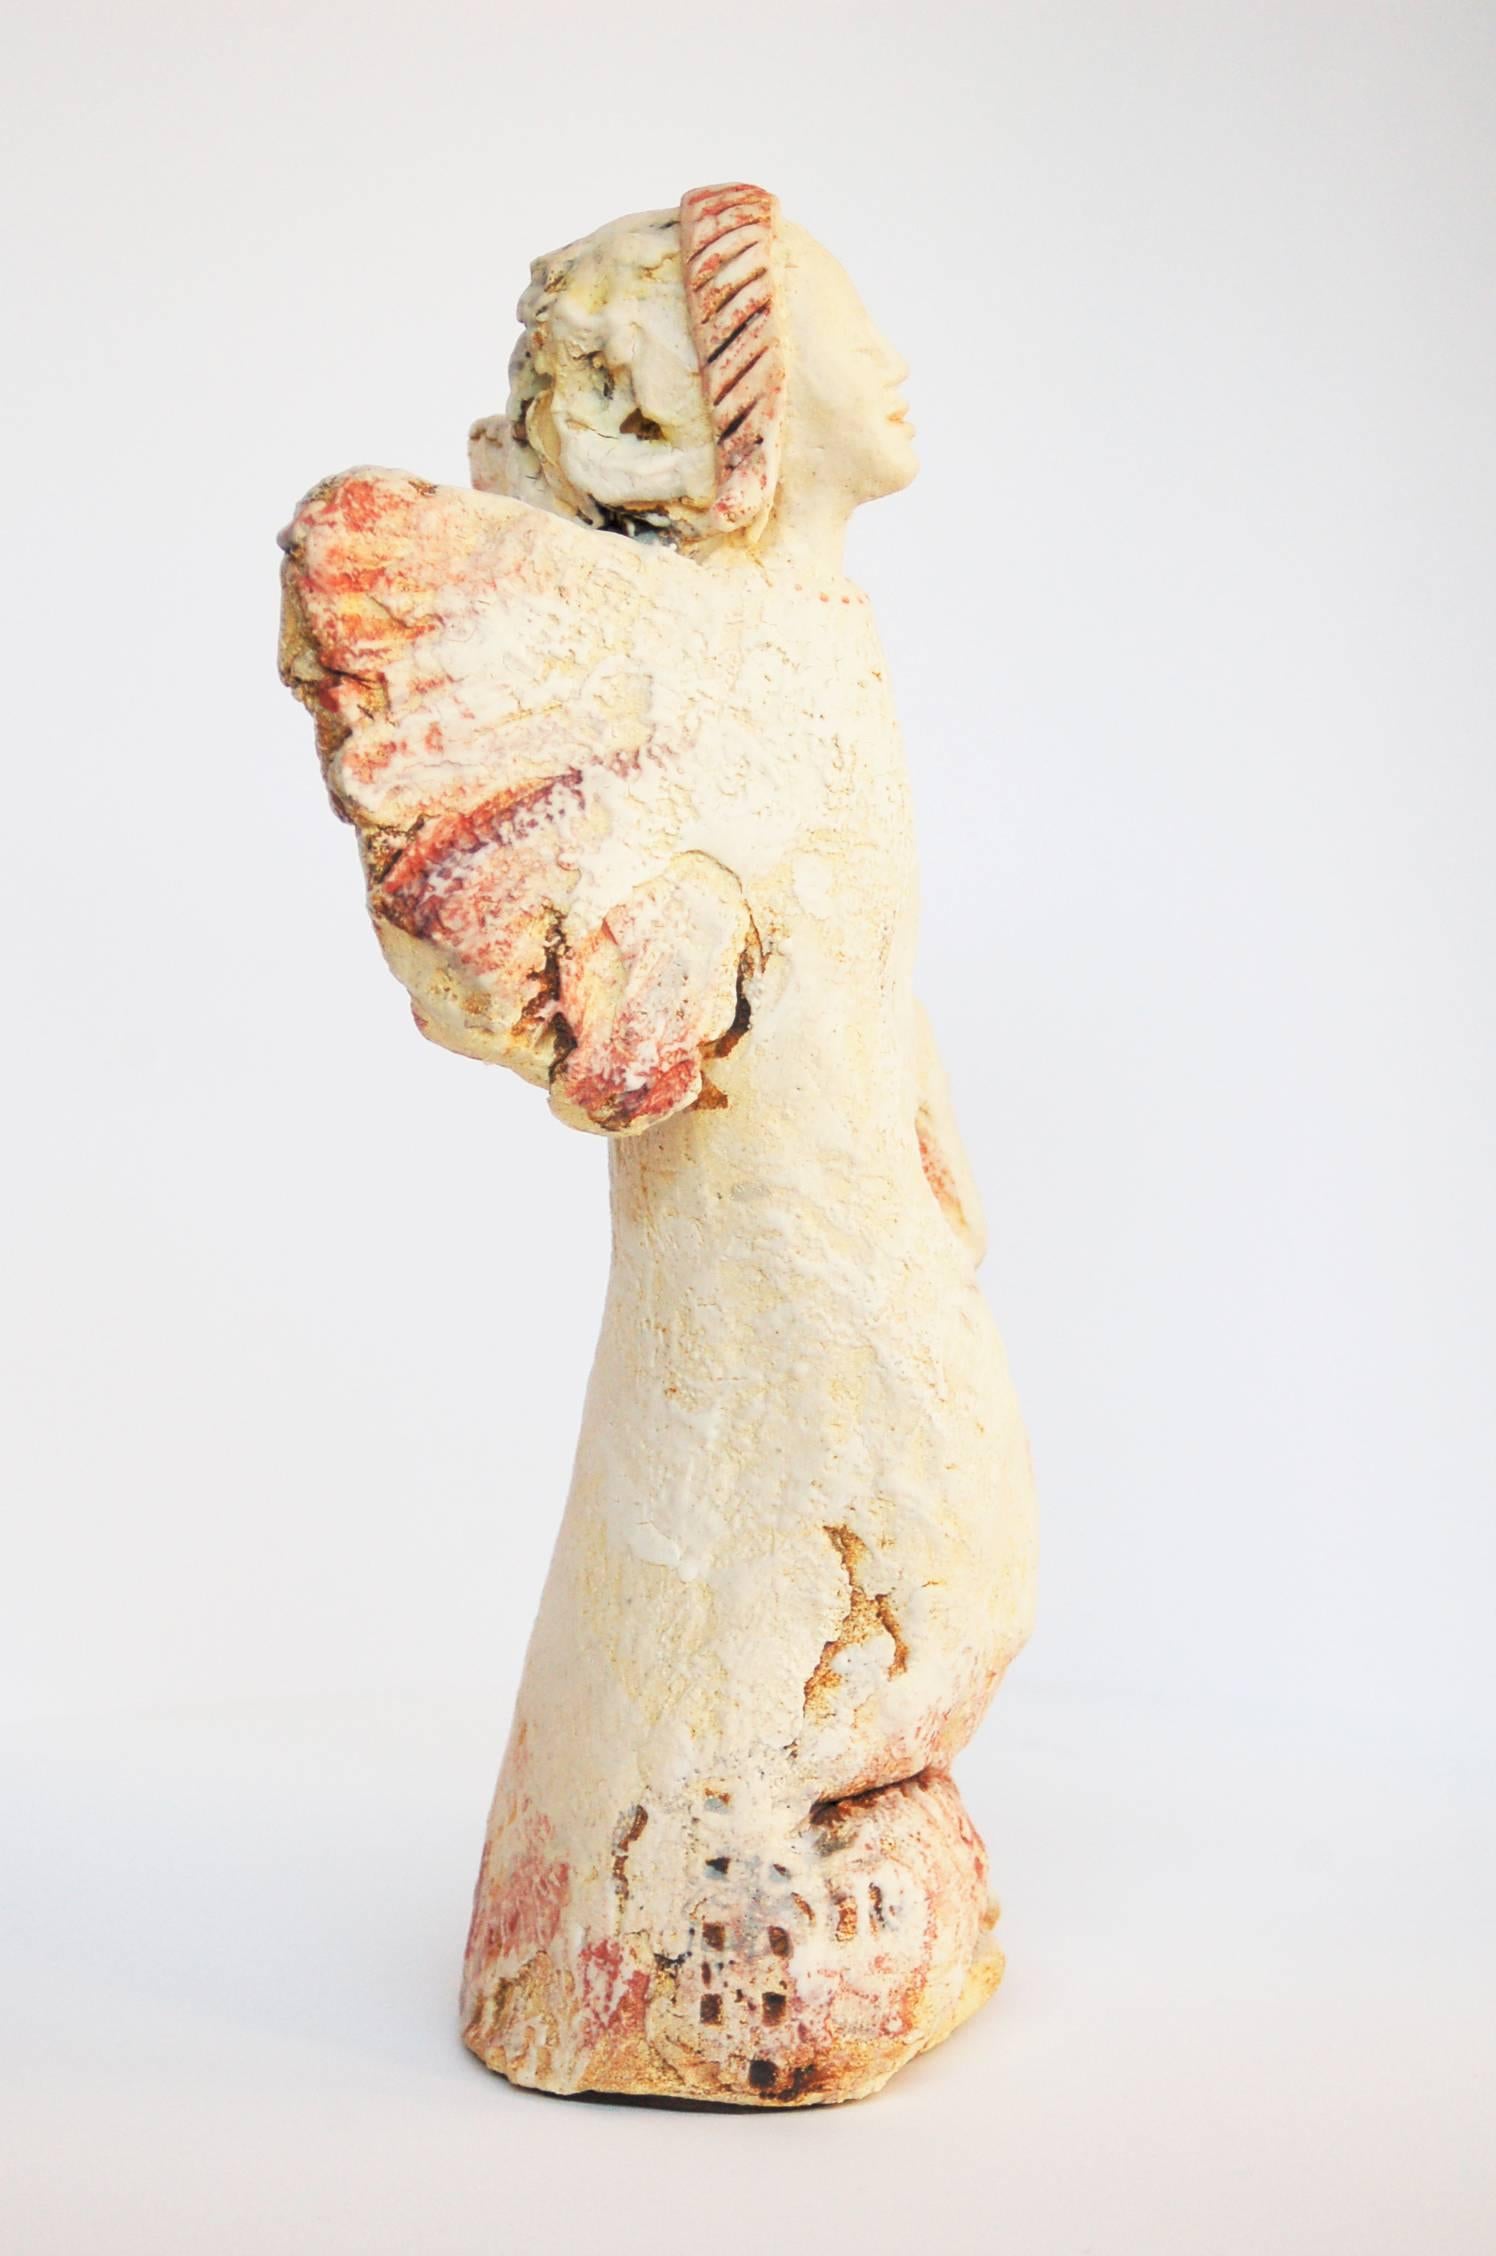 Mila is a Catalan artist. She has always works in ceramics. She has exhibited in various countries in Europe. She is inspired by Angels and they are a recurring theme throughout her works. She is Macu Jordà's ceramics teacher.